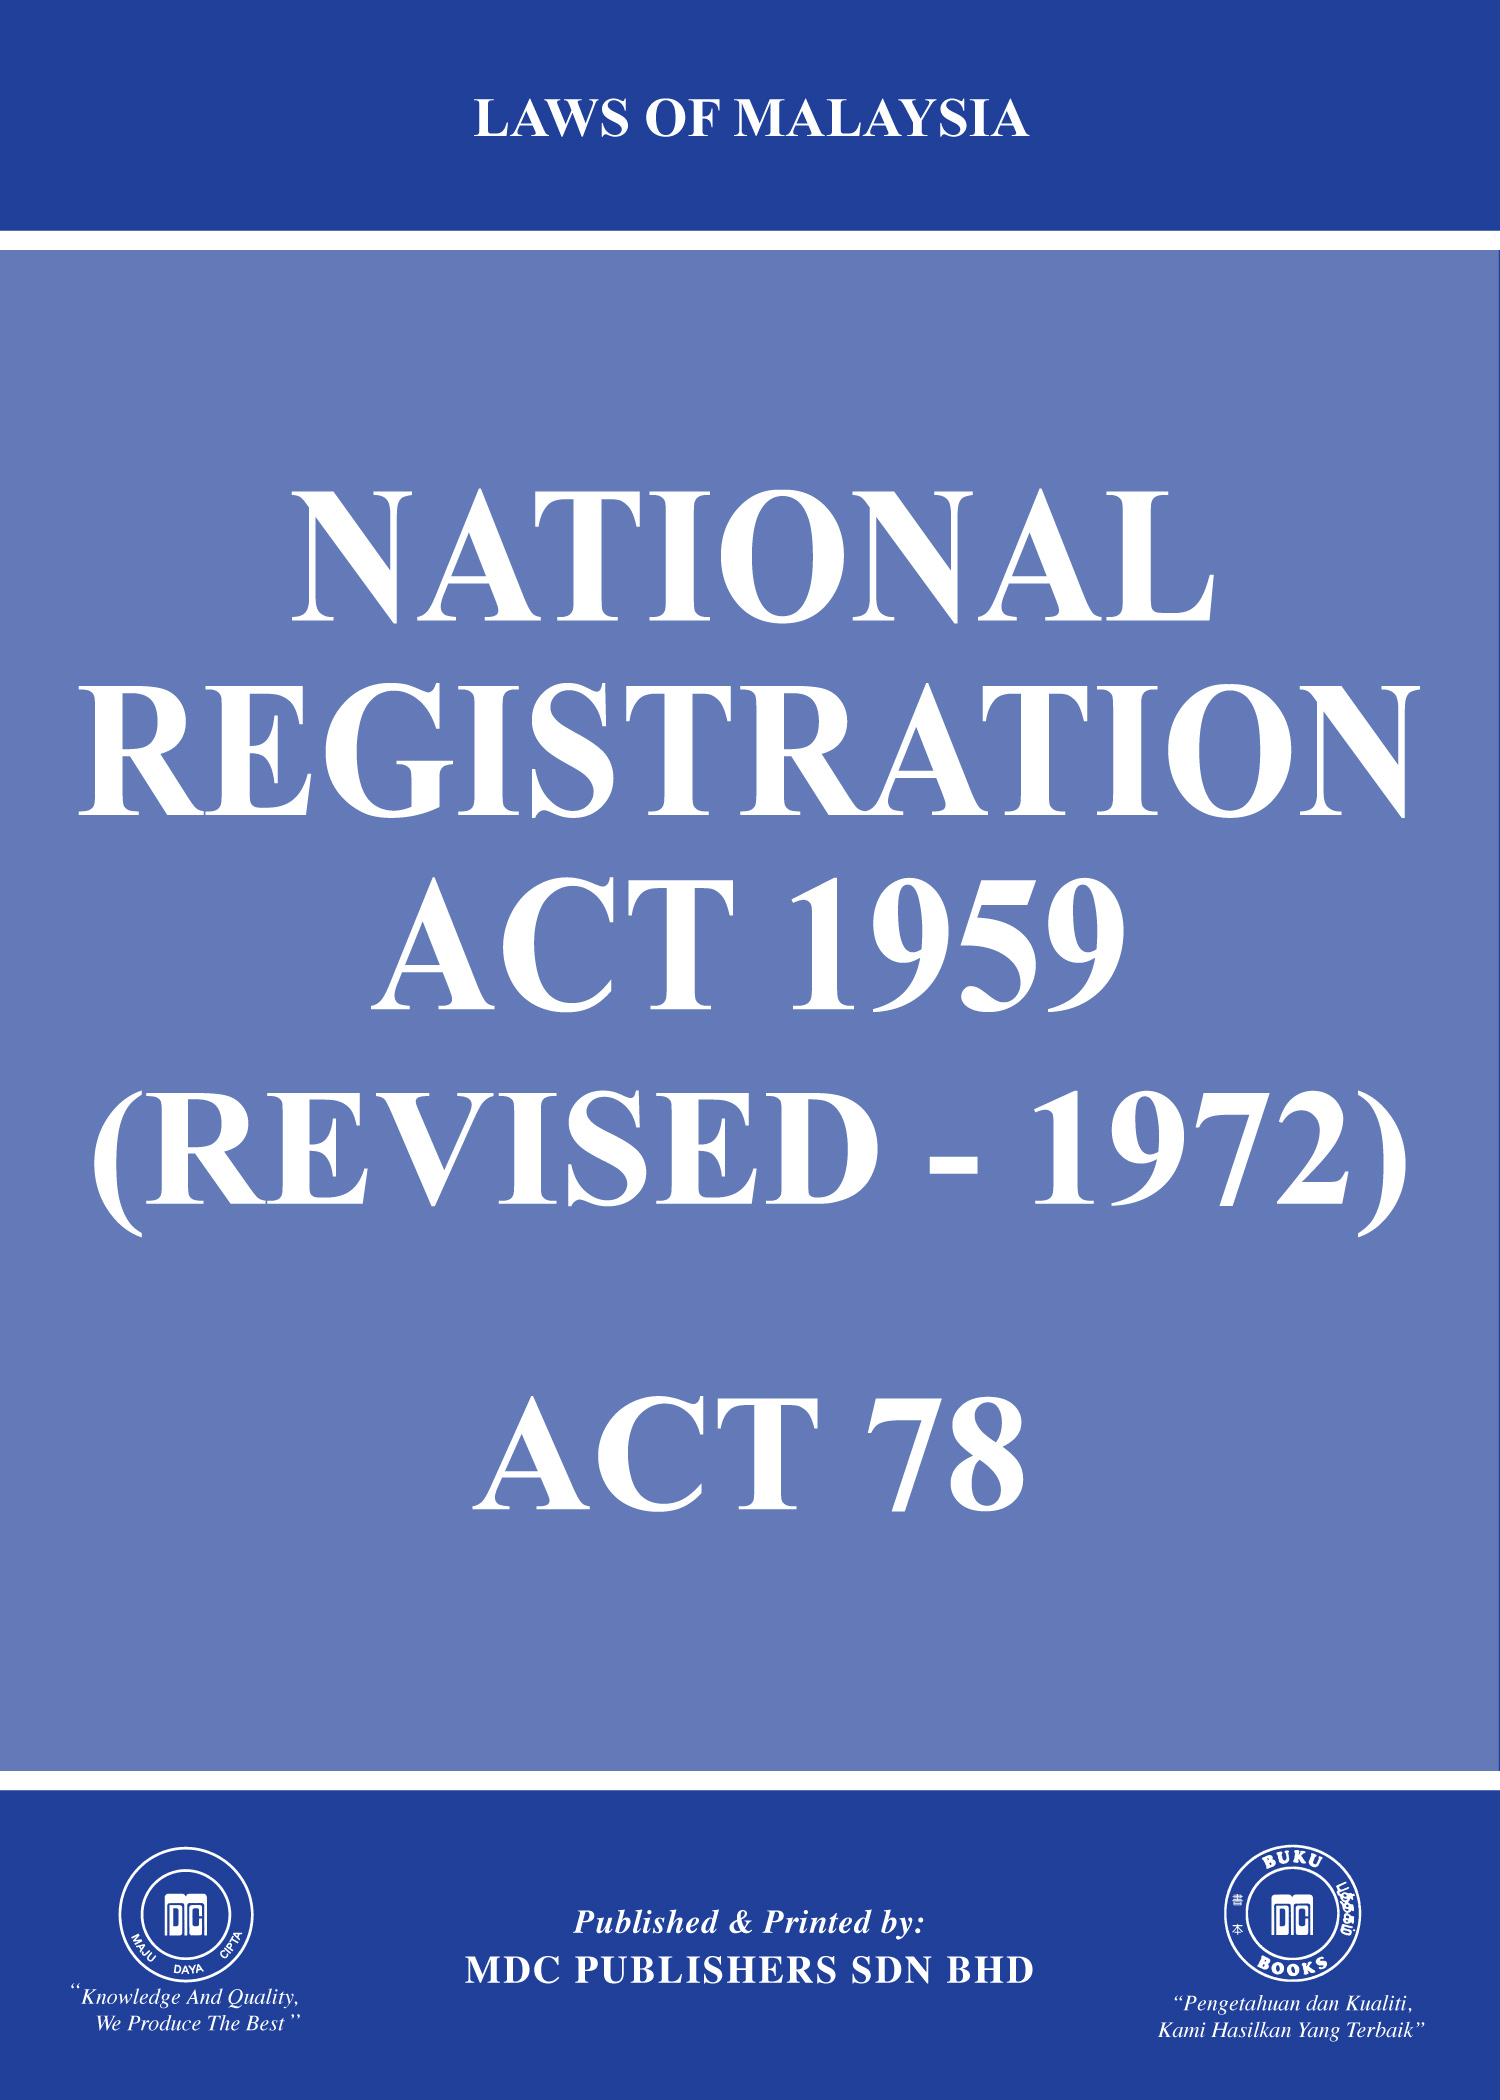 Laws of Malaysia National Registration Act 1959 (Revised 1972)